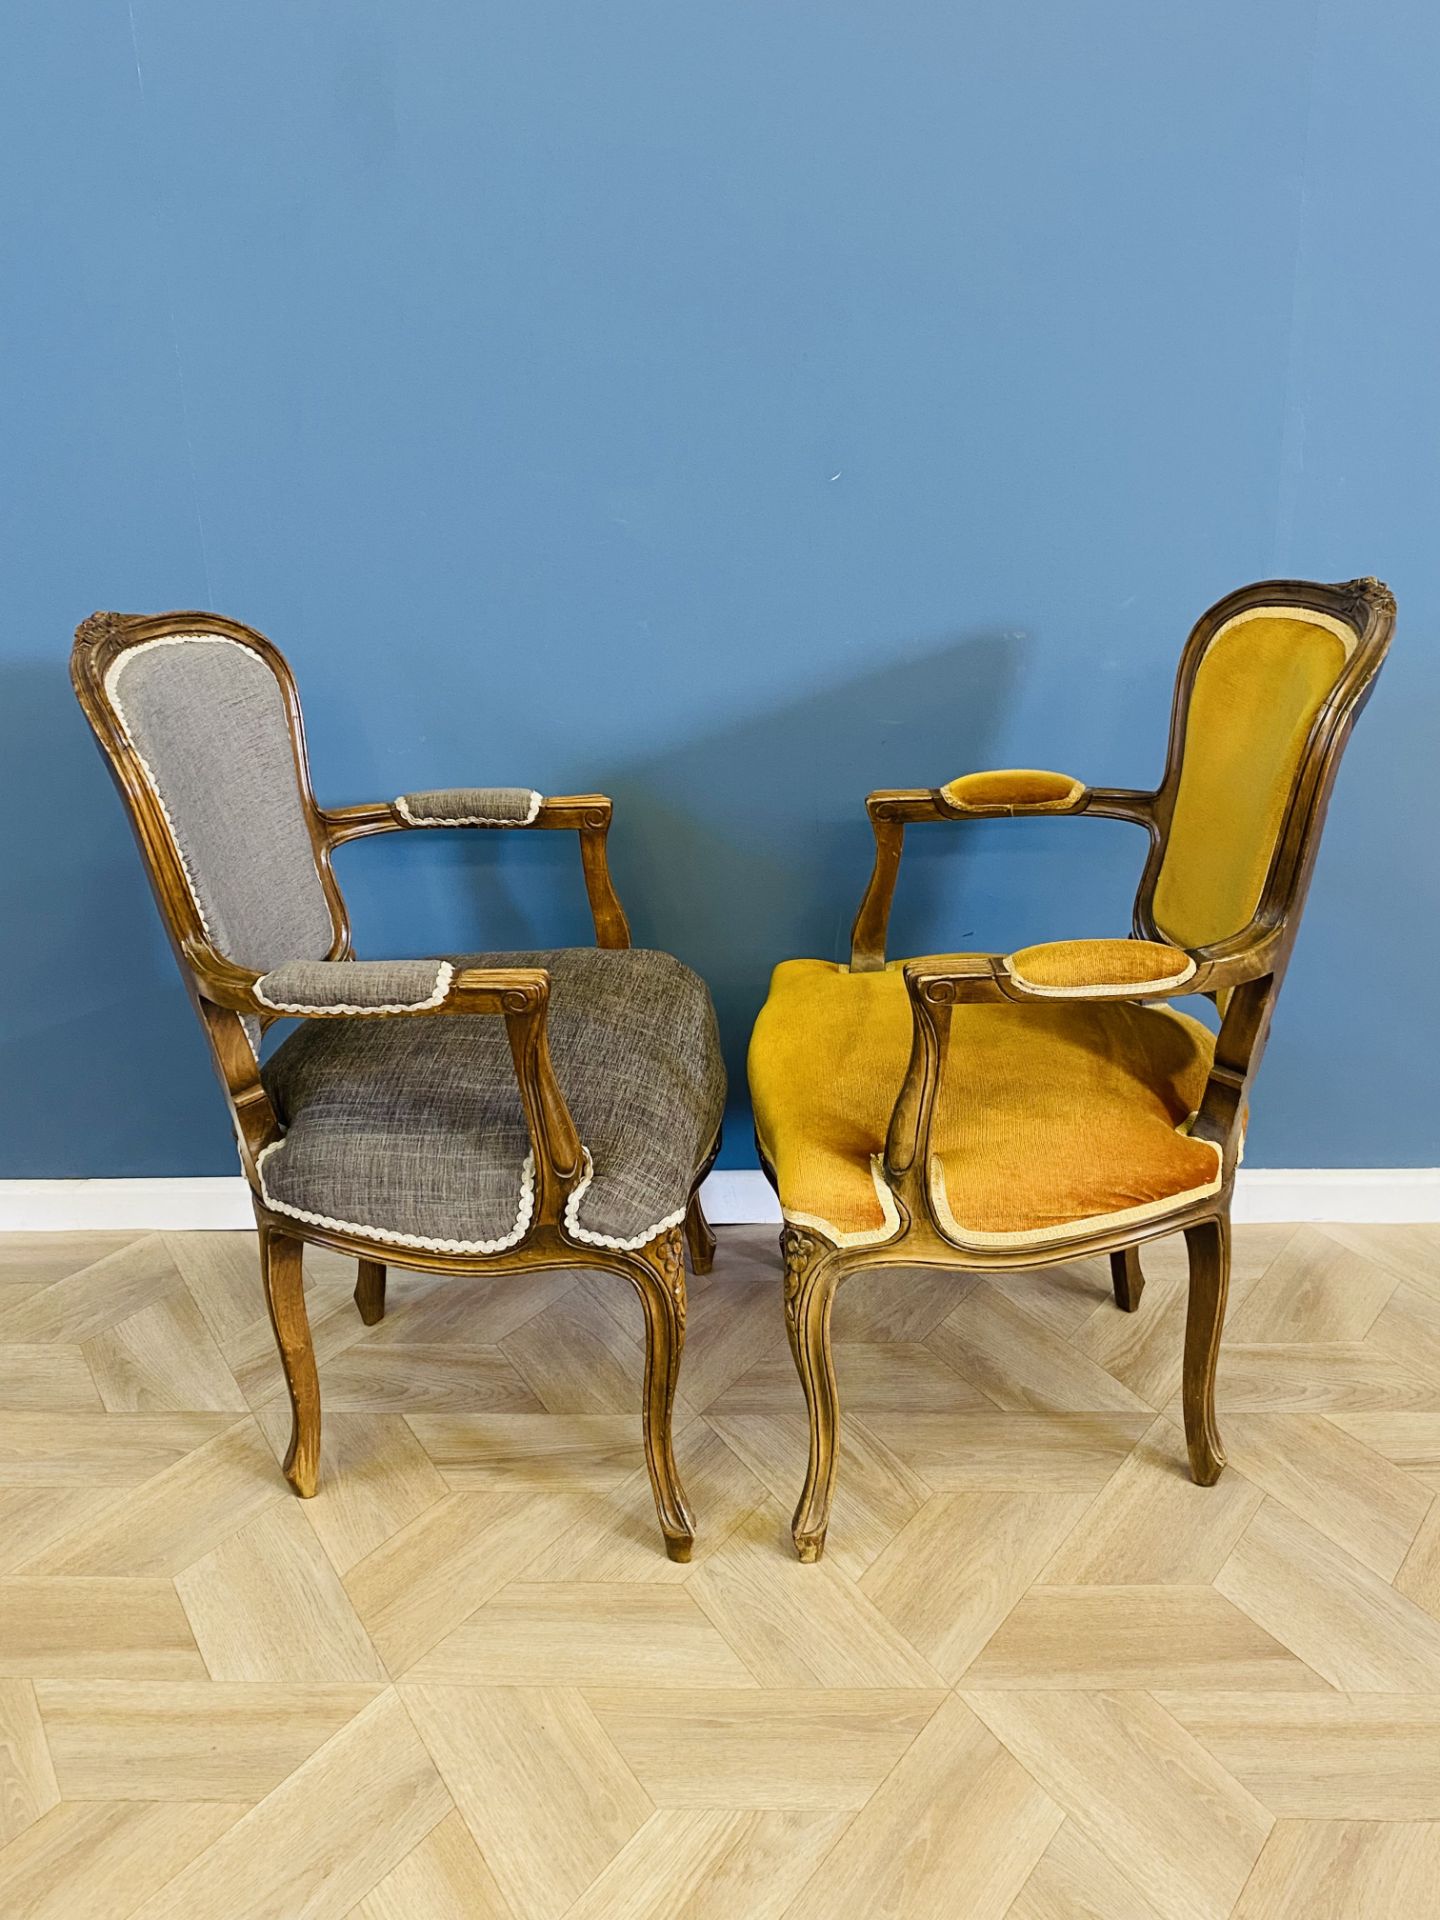 Pair of French style elbow chairs - Image 3 of 8